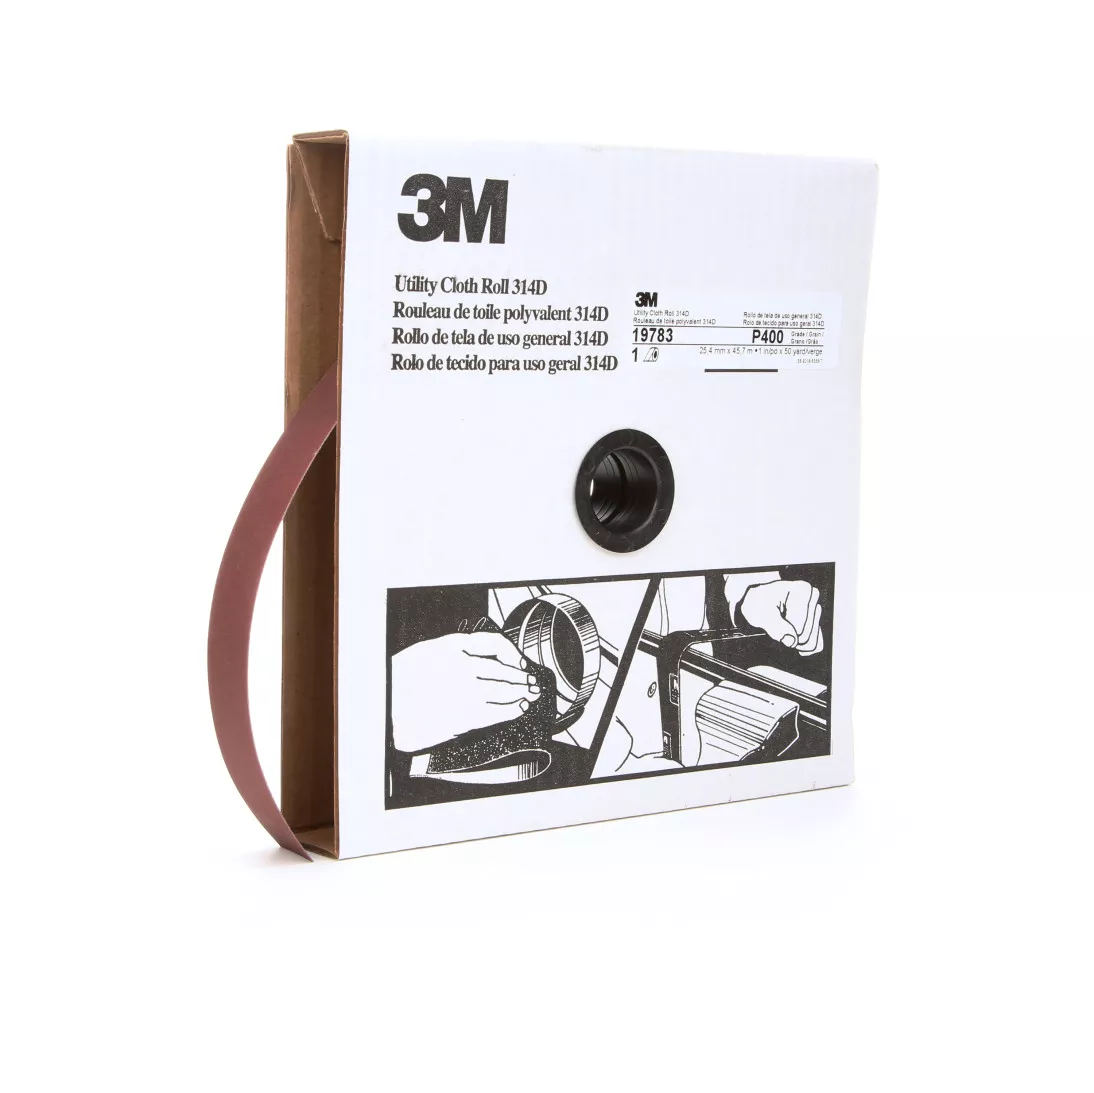 3M™ Utility Cloth Roll 314D, P400 J-weight, 1 in x 50 yd, 5 ea/Case